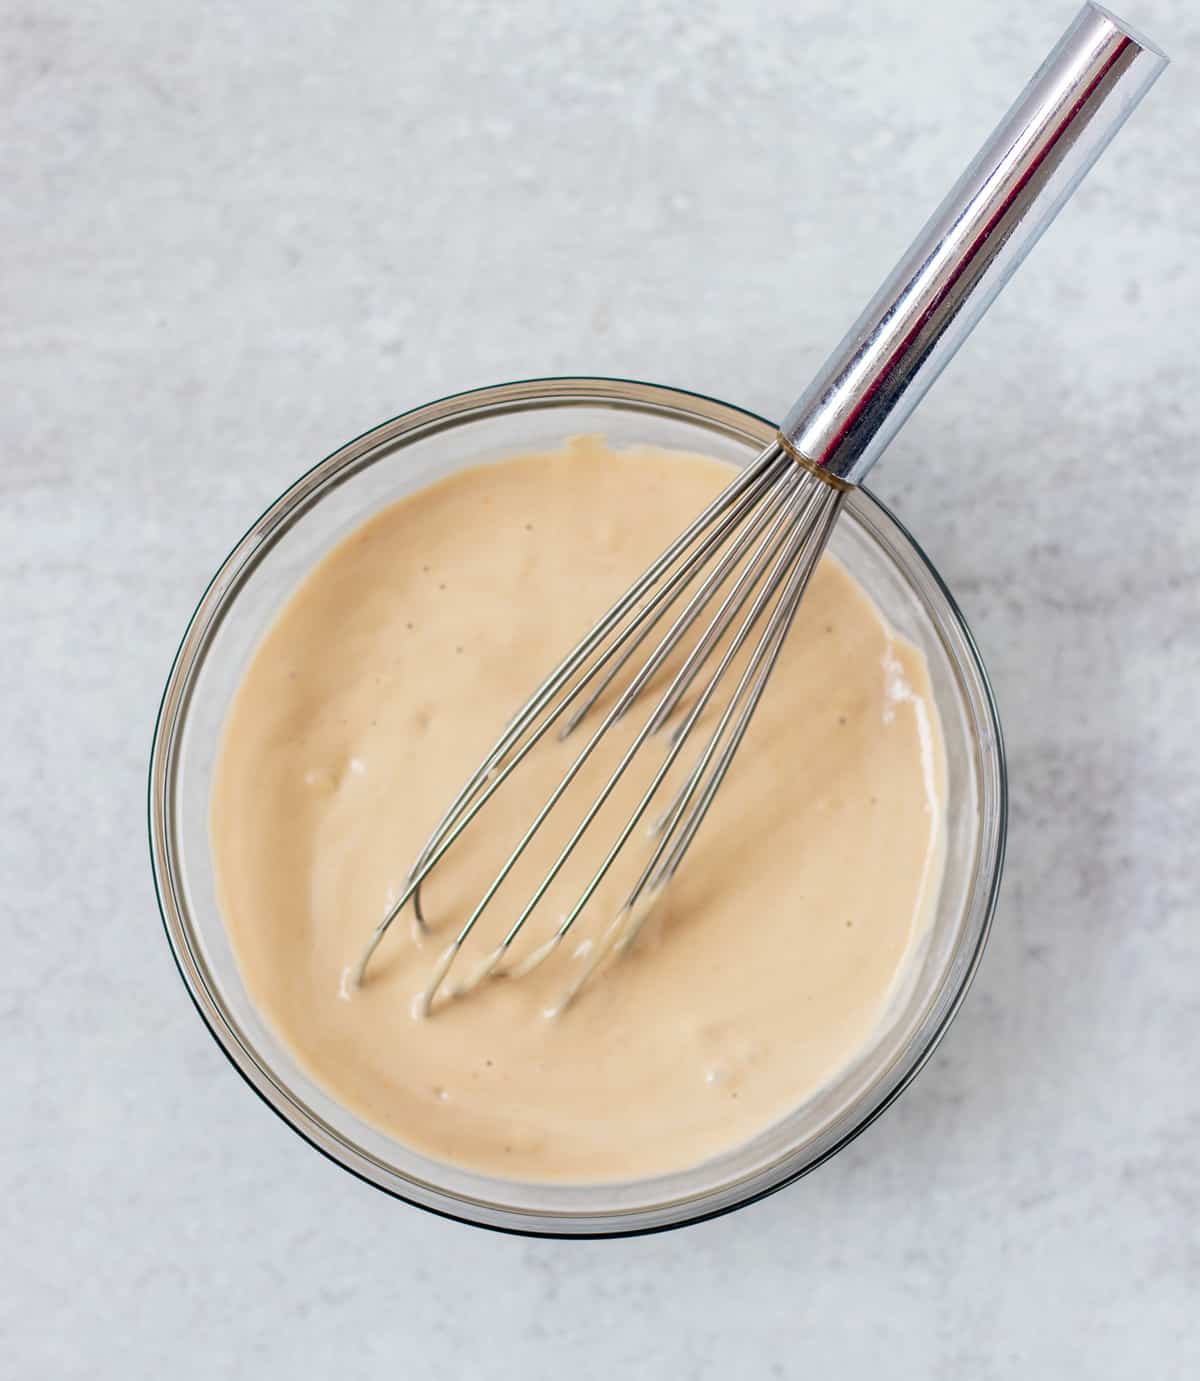 tahini dressing in a clear glass mixing bowl with a silver whisk.